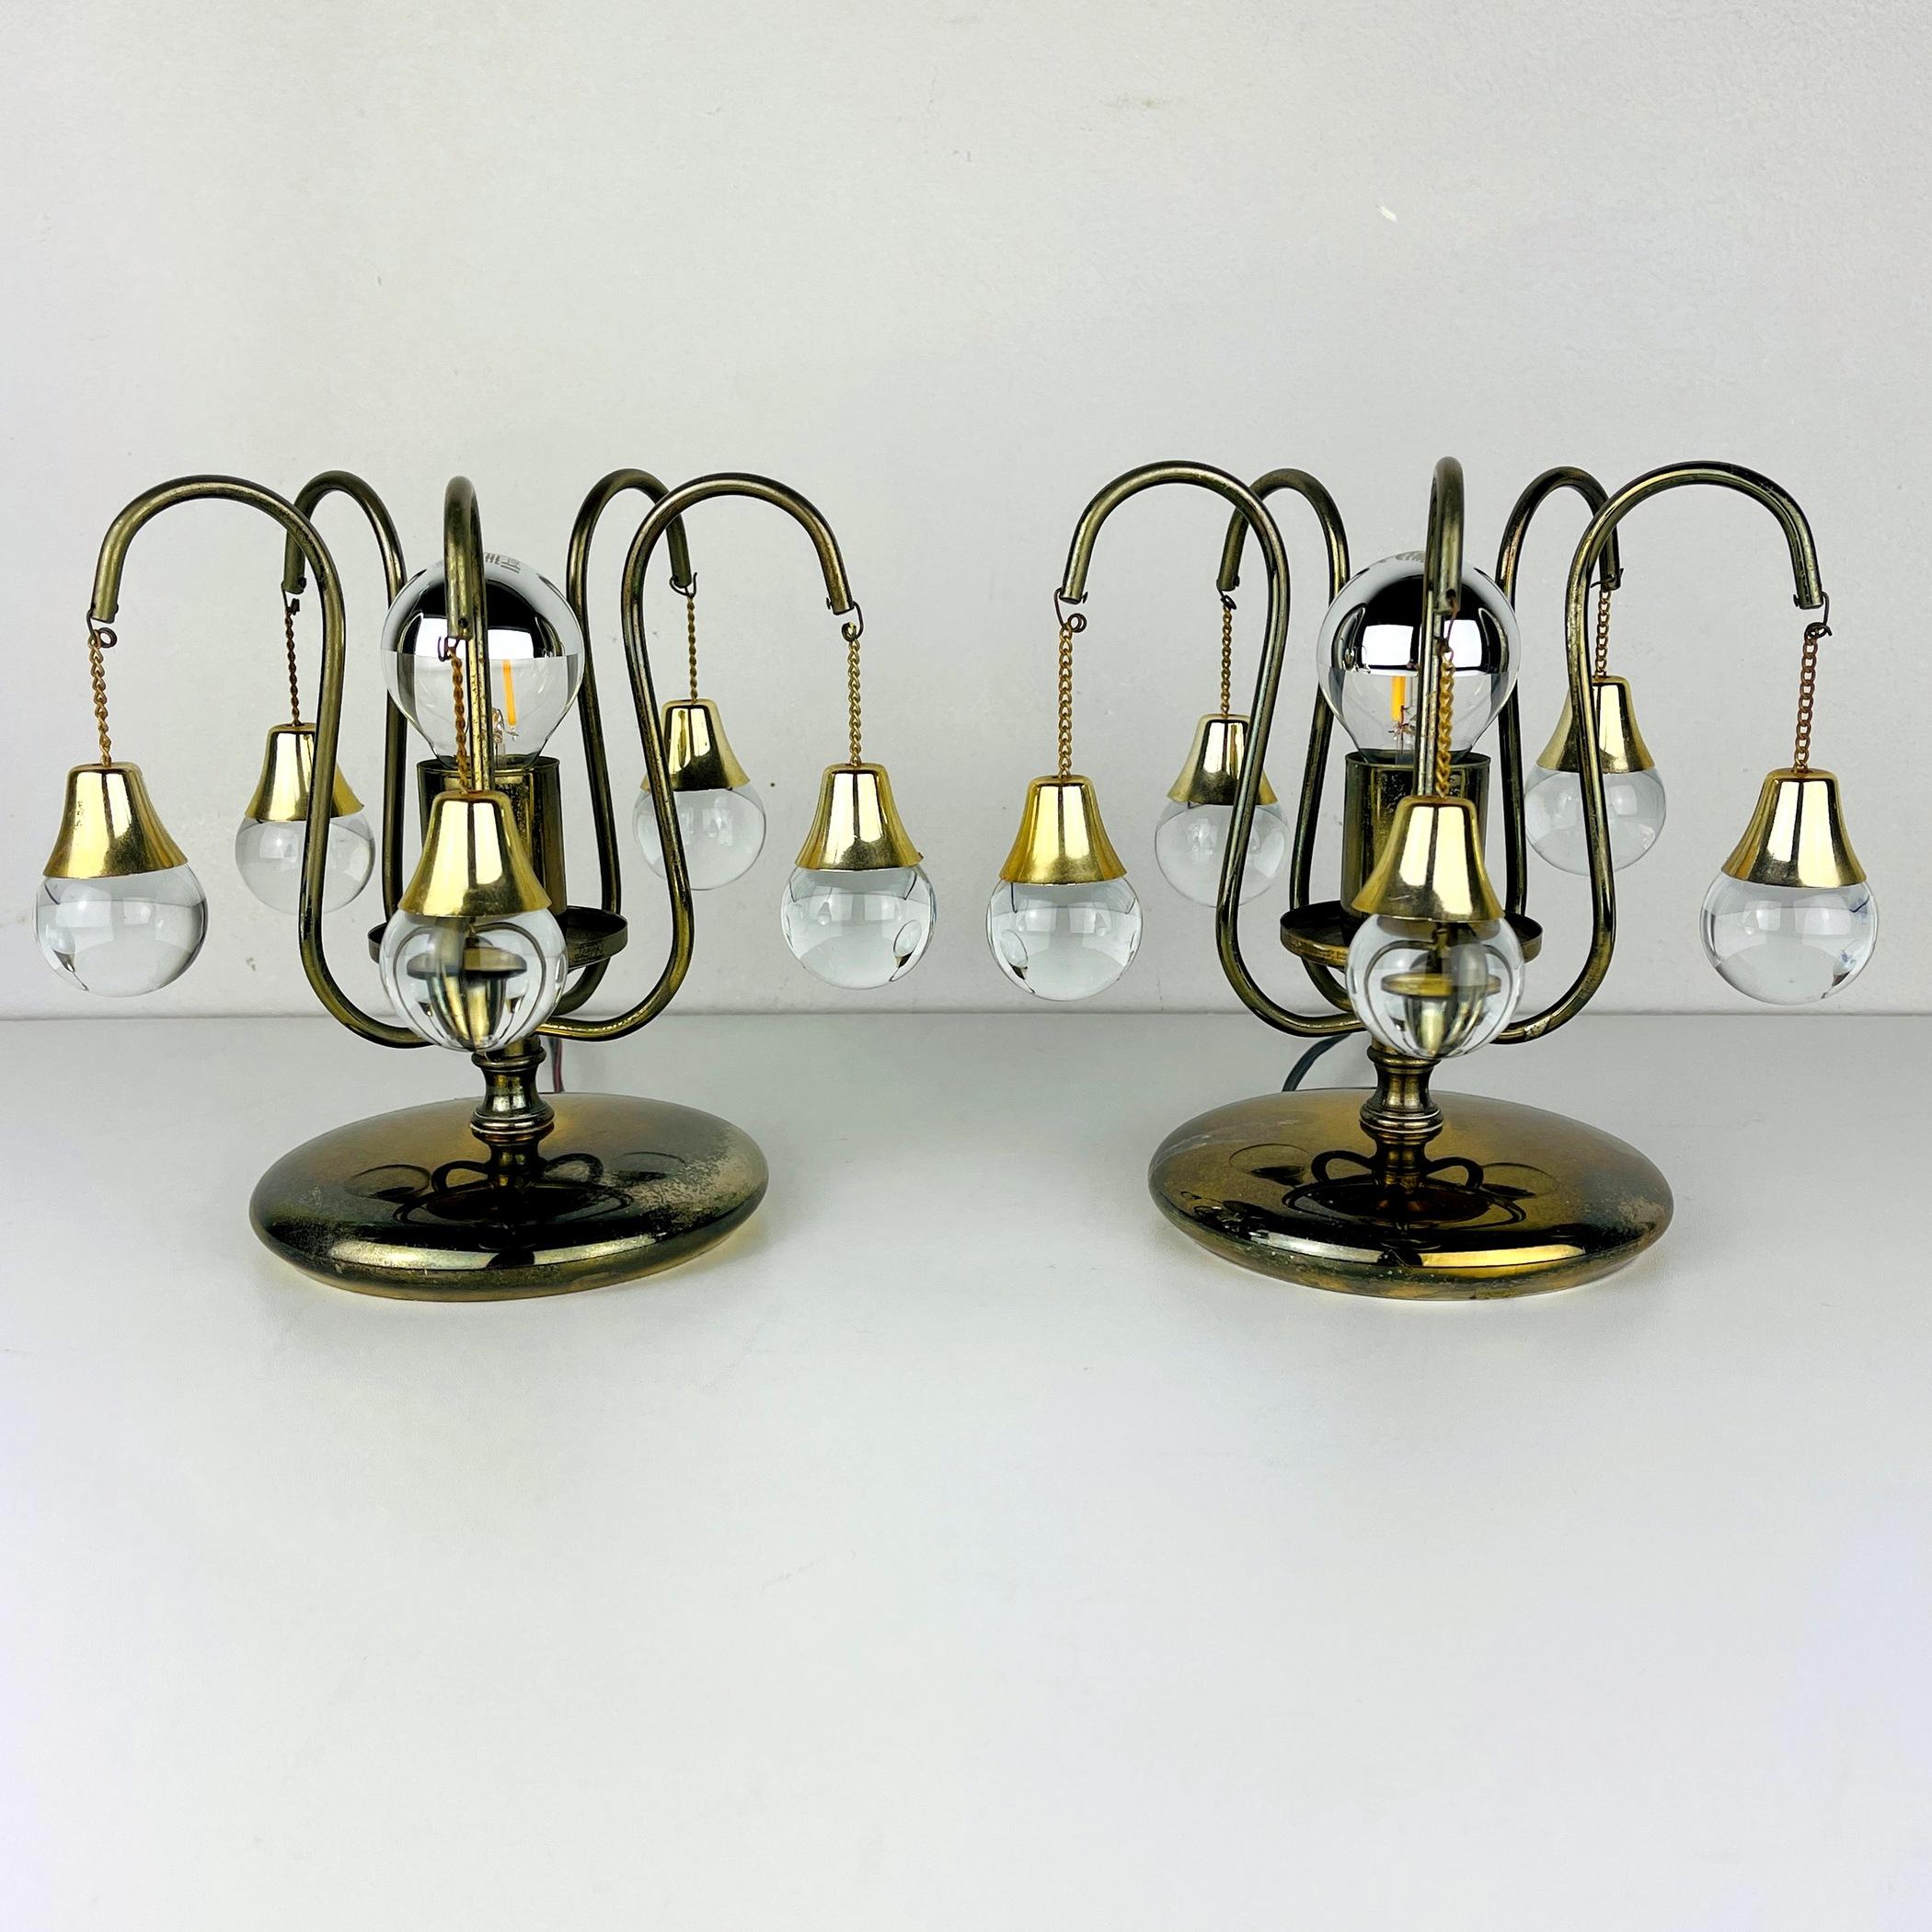 Pair of beautiful table lamps made in Italy in the 1960s. Charming vintage table lamps will decorate your bedroom, nursery, living room. Height: 18 centimetres Width: 20 centimetres Very good vintage condition. The metal has a beautiful natural